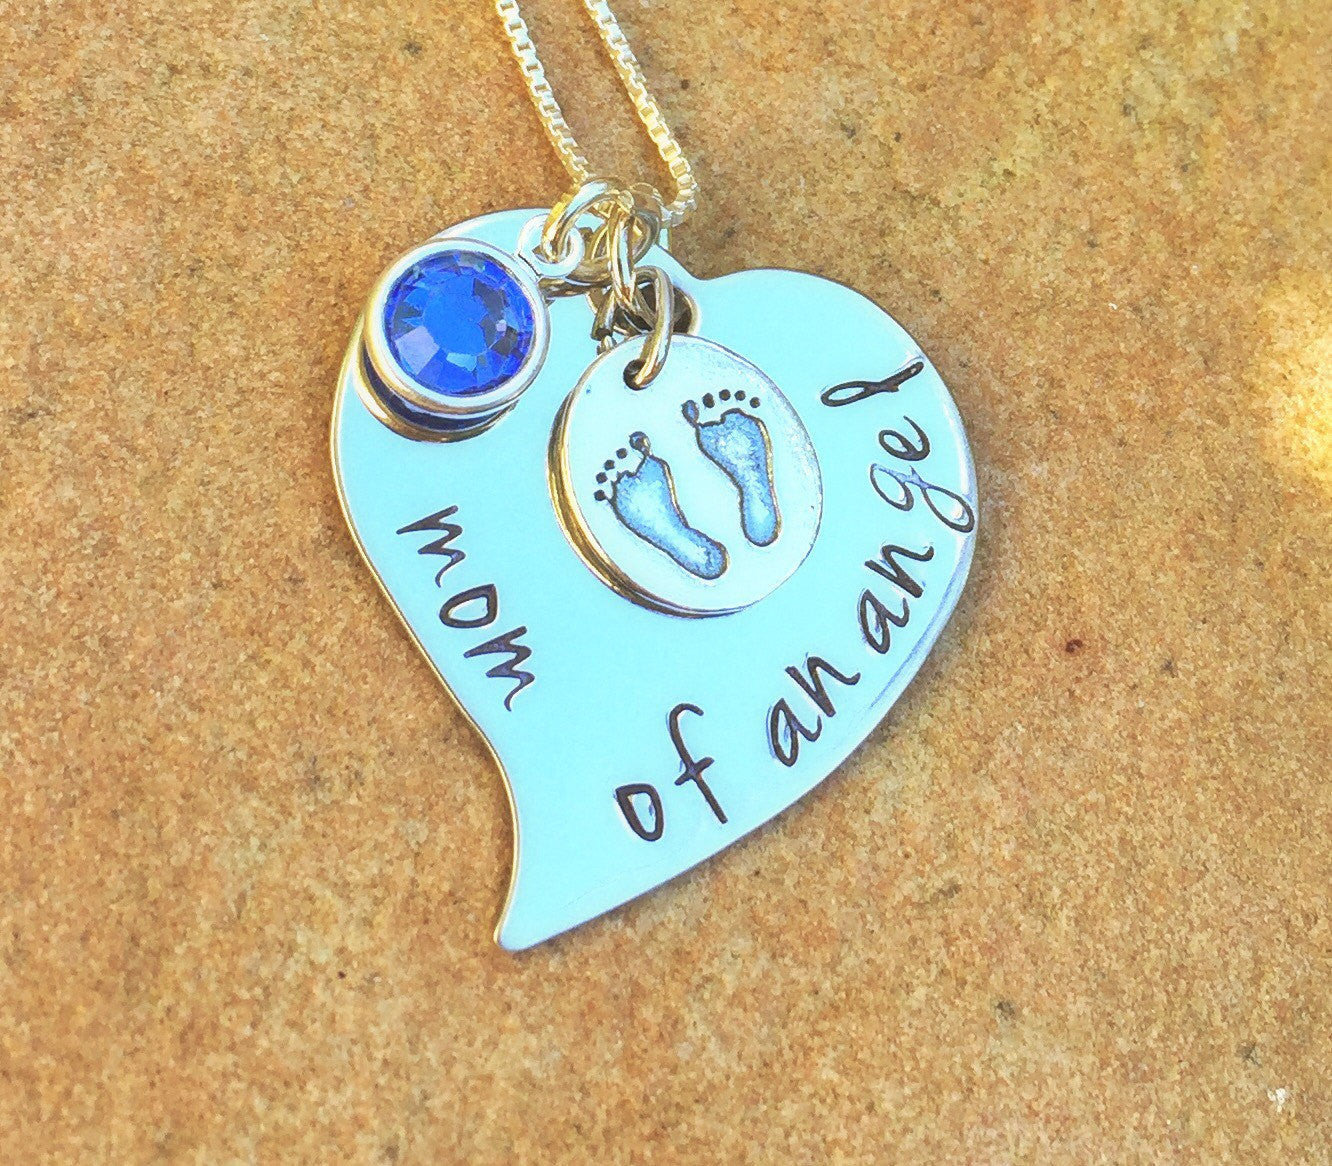 Mom Of An Angel Necklace, Sympathy Gifts,Memorial Necklace, Sympathy Gift, Memorial Baby, Mother's Loss, Personalized Necklace, natashaaloha - Natashaaloha, jewelry, bracelets, necklace, keychains, fishing lures, gifts for men, charms, personalized, 